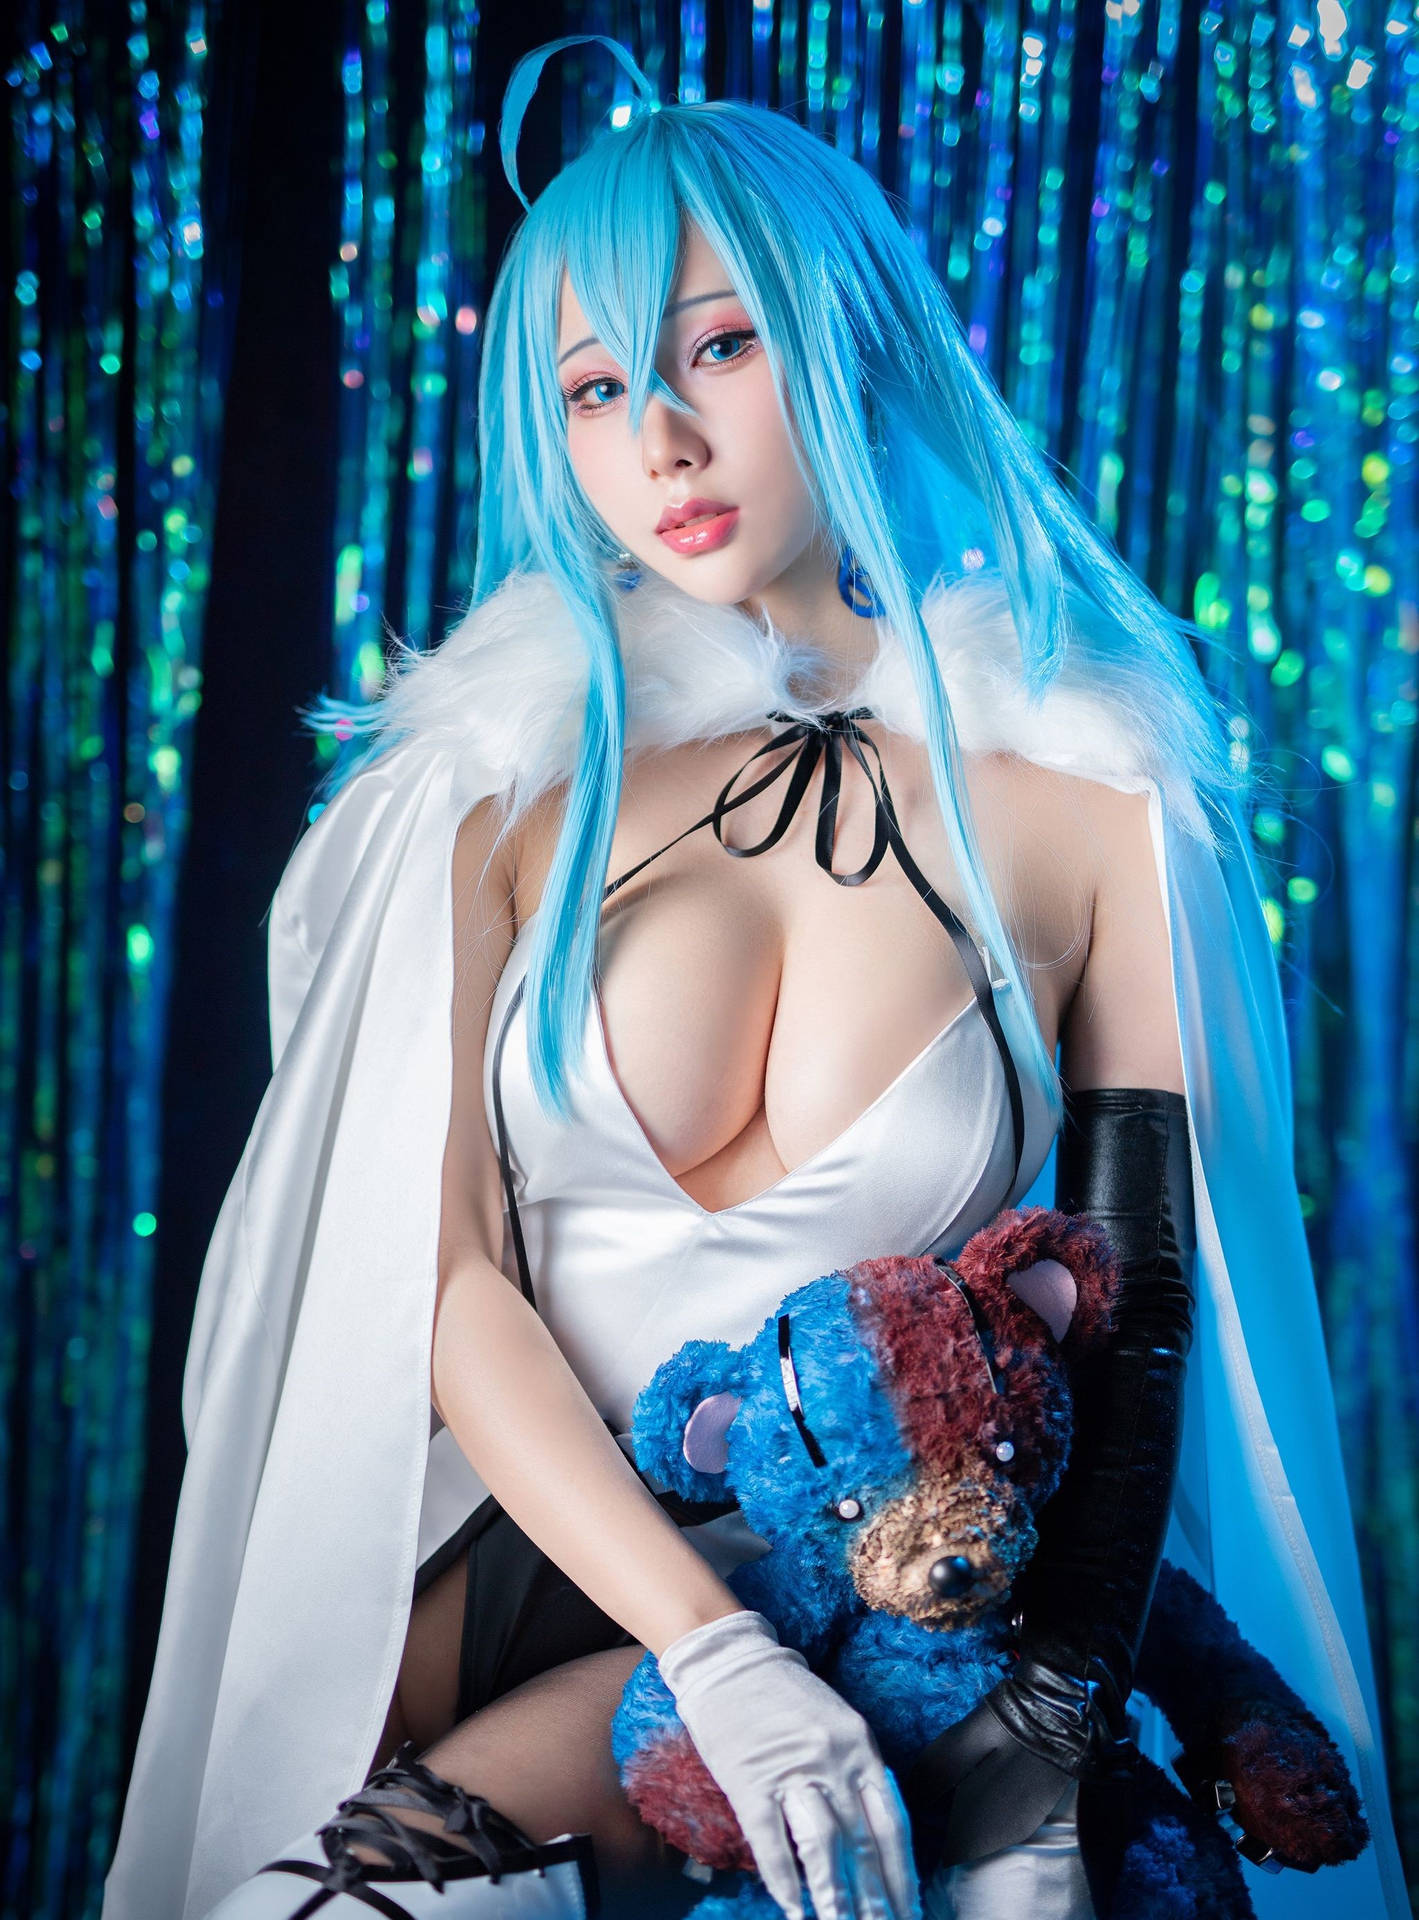 Cosplay Featuring Vivy - The Ai Idol Background